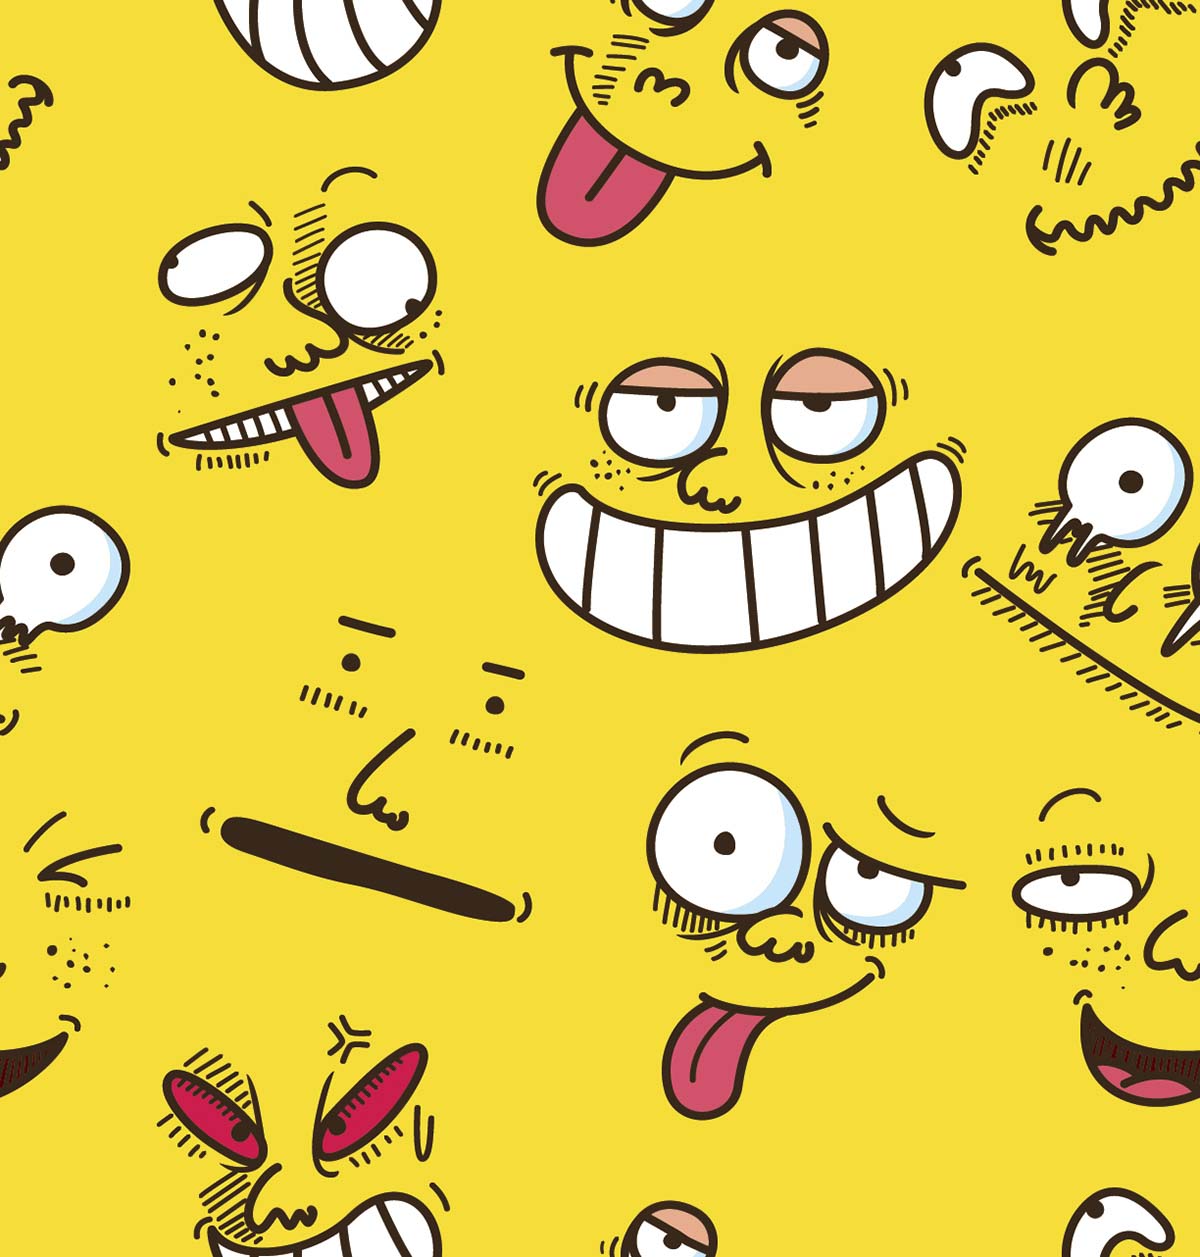 A yellow background with different faces